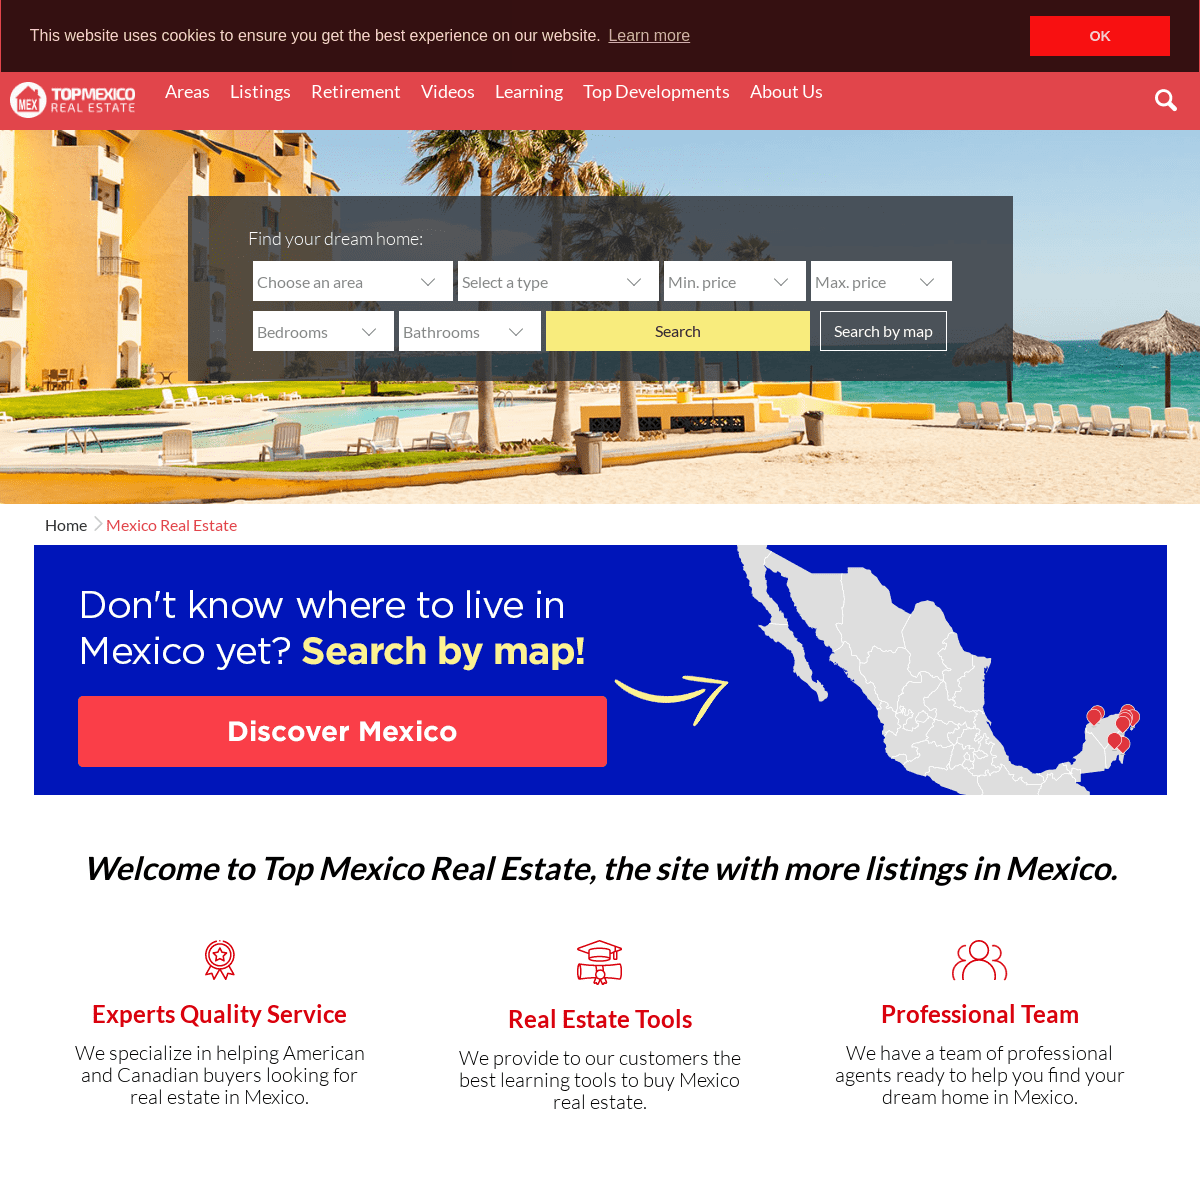 A complete backup of https://topmexicorealestate.com